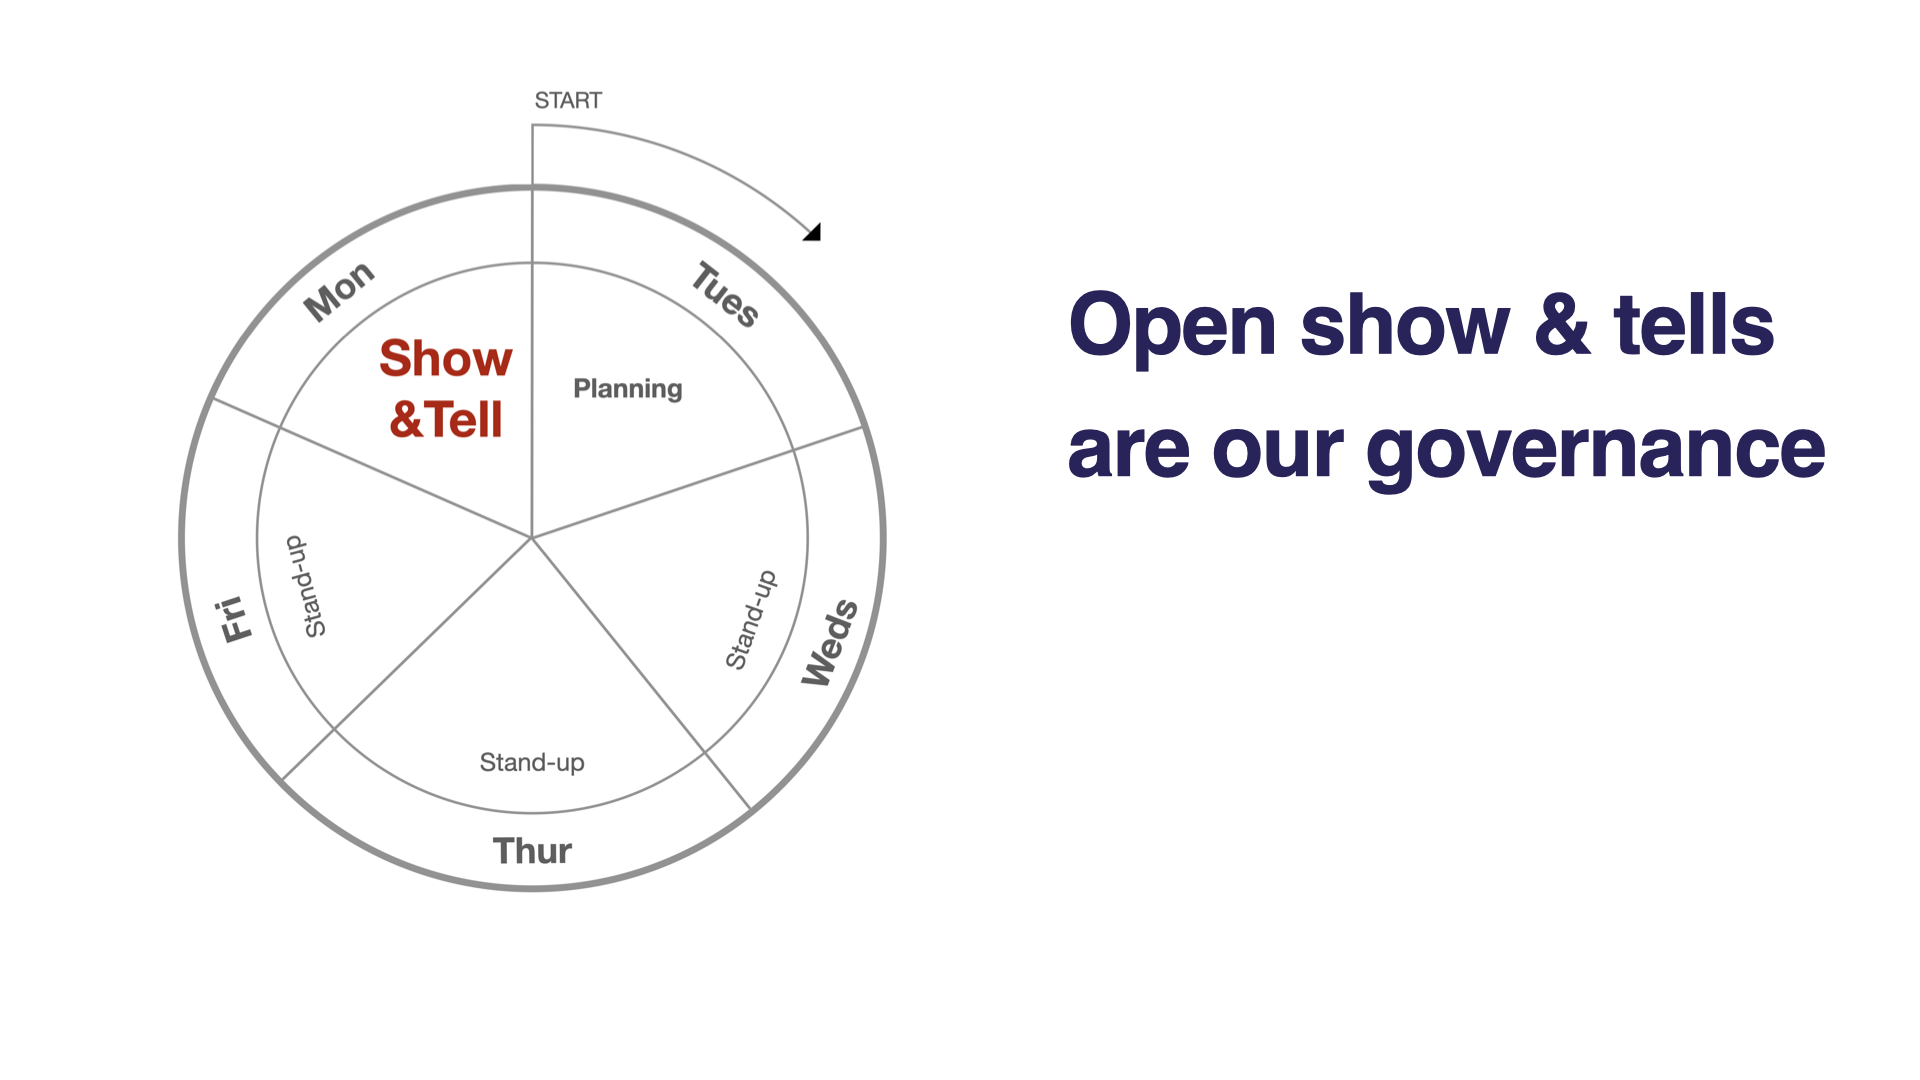 A slide showing a circular diagram of our weekly rhythm, with planning on Tuesday stand-ups on Wednesday, Thursday and Friday, and show and tell on Mondays.